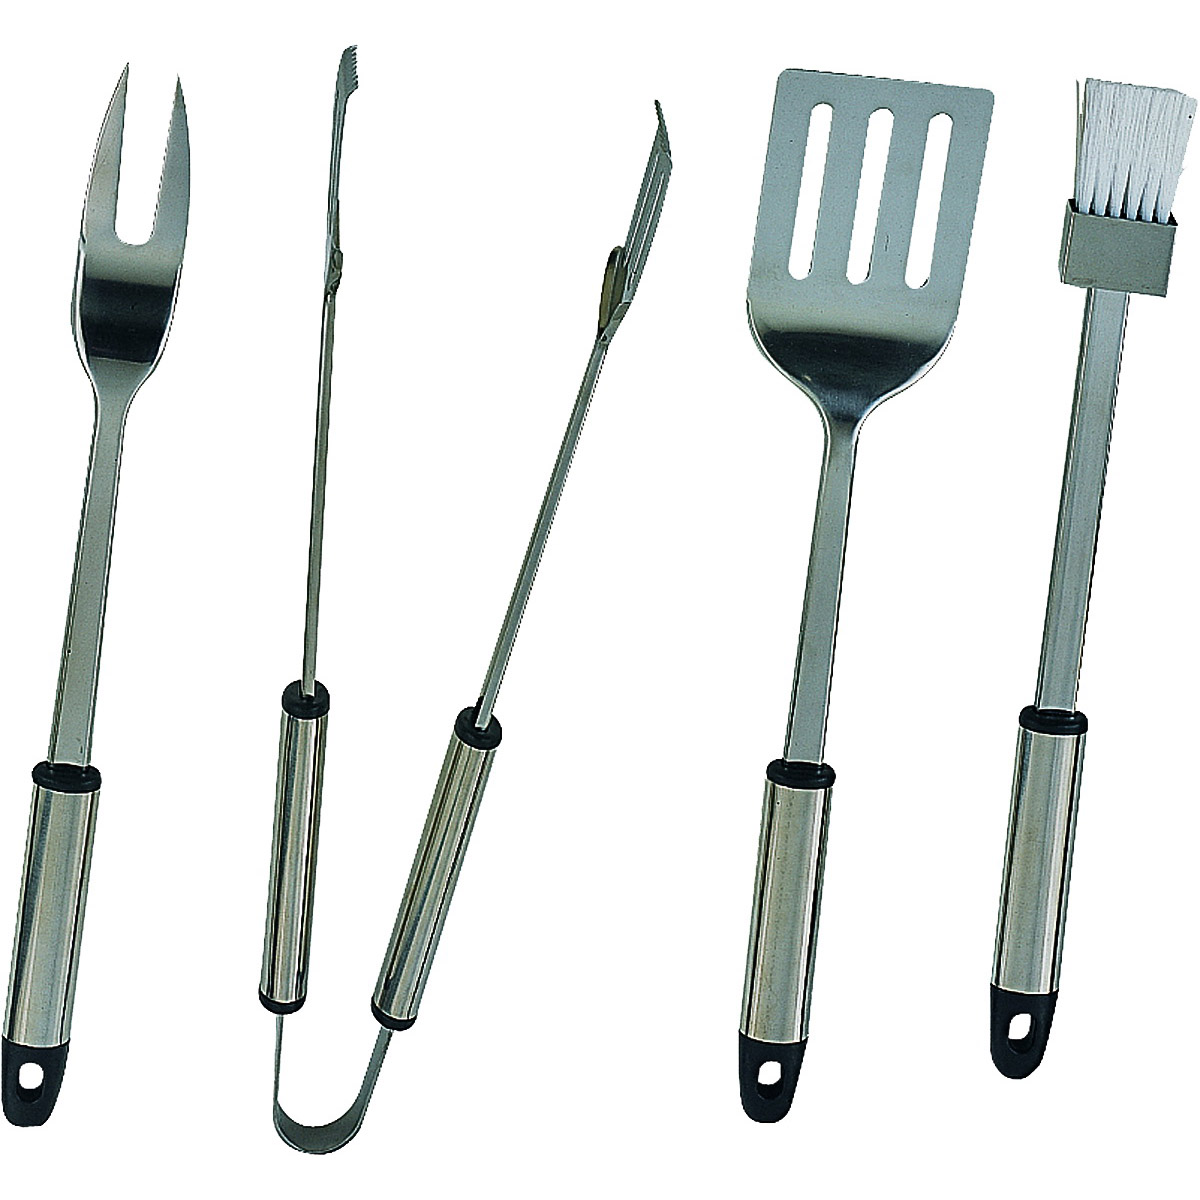 Q-430A3L Barbecue Tool Set with Handle and Hanger, 1.5 mm Gauge, Stainless Steel Blade, Stainless Steel